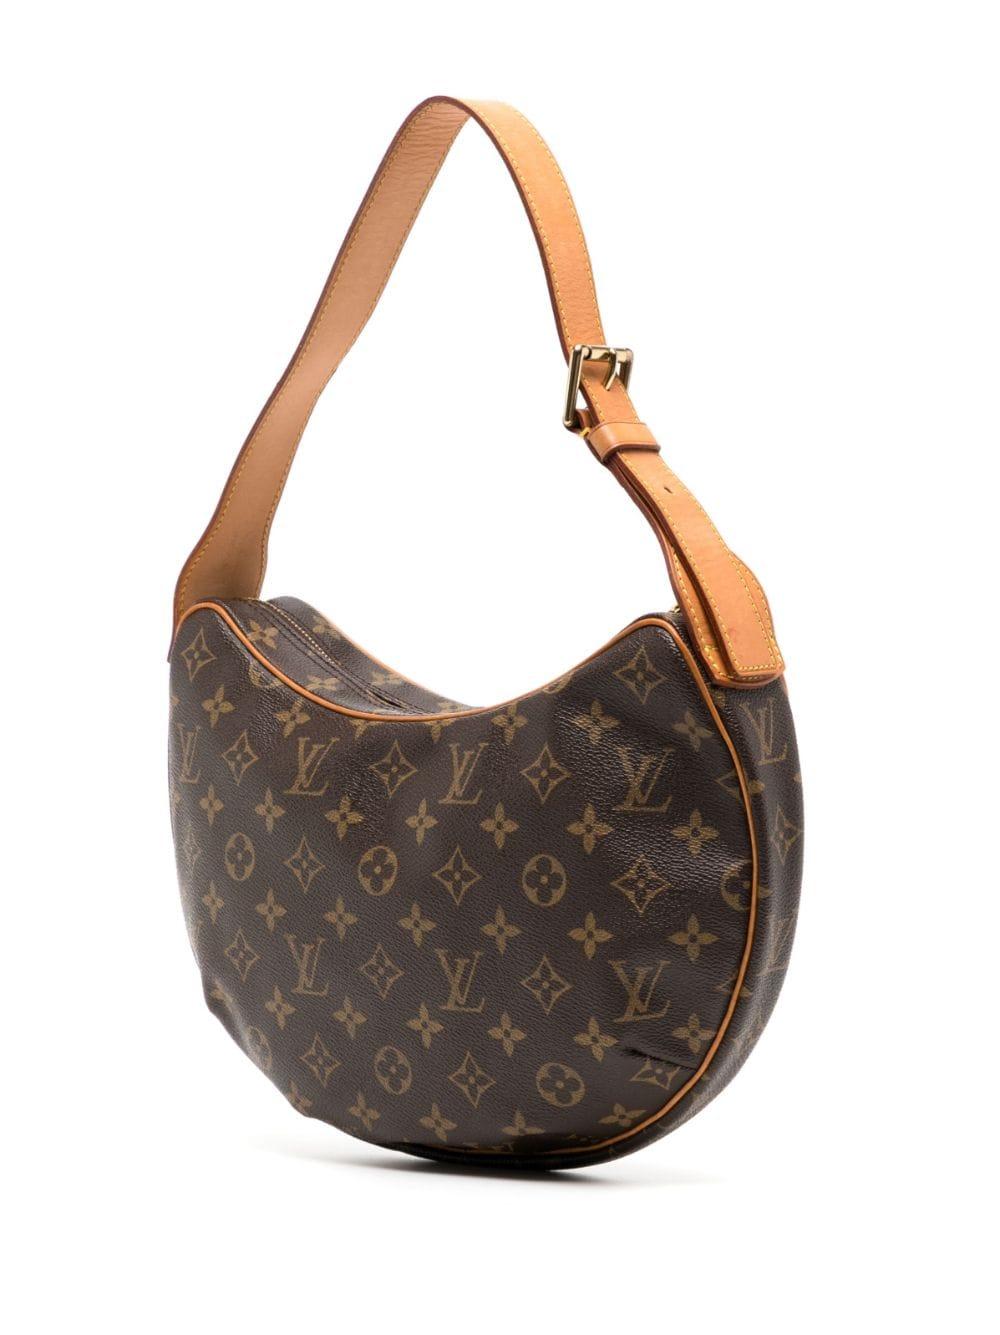 Louis Vuitton Croissant MM Bag  In Excellent Condition For Sale In London, GB